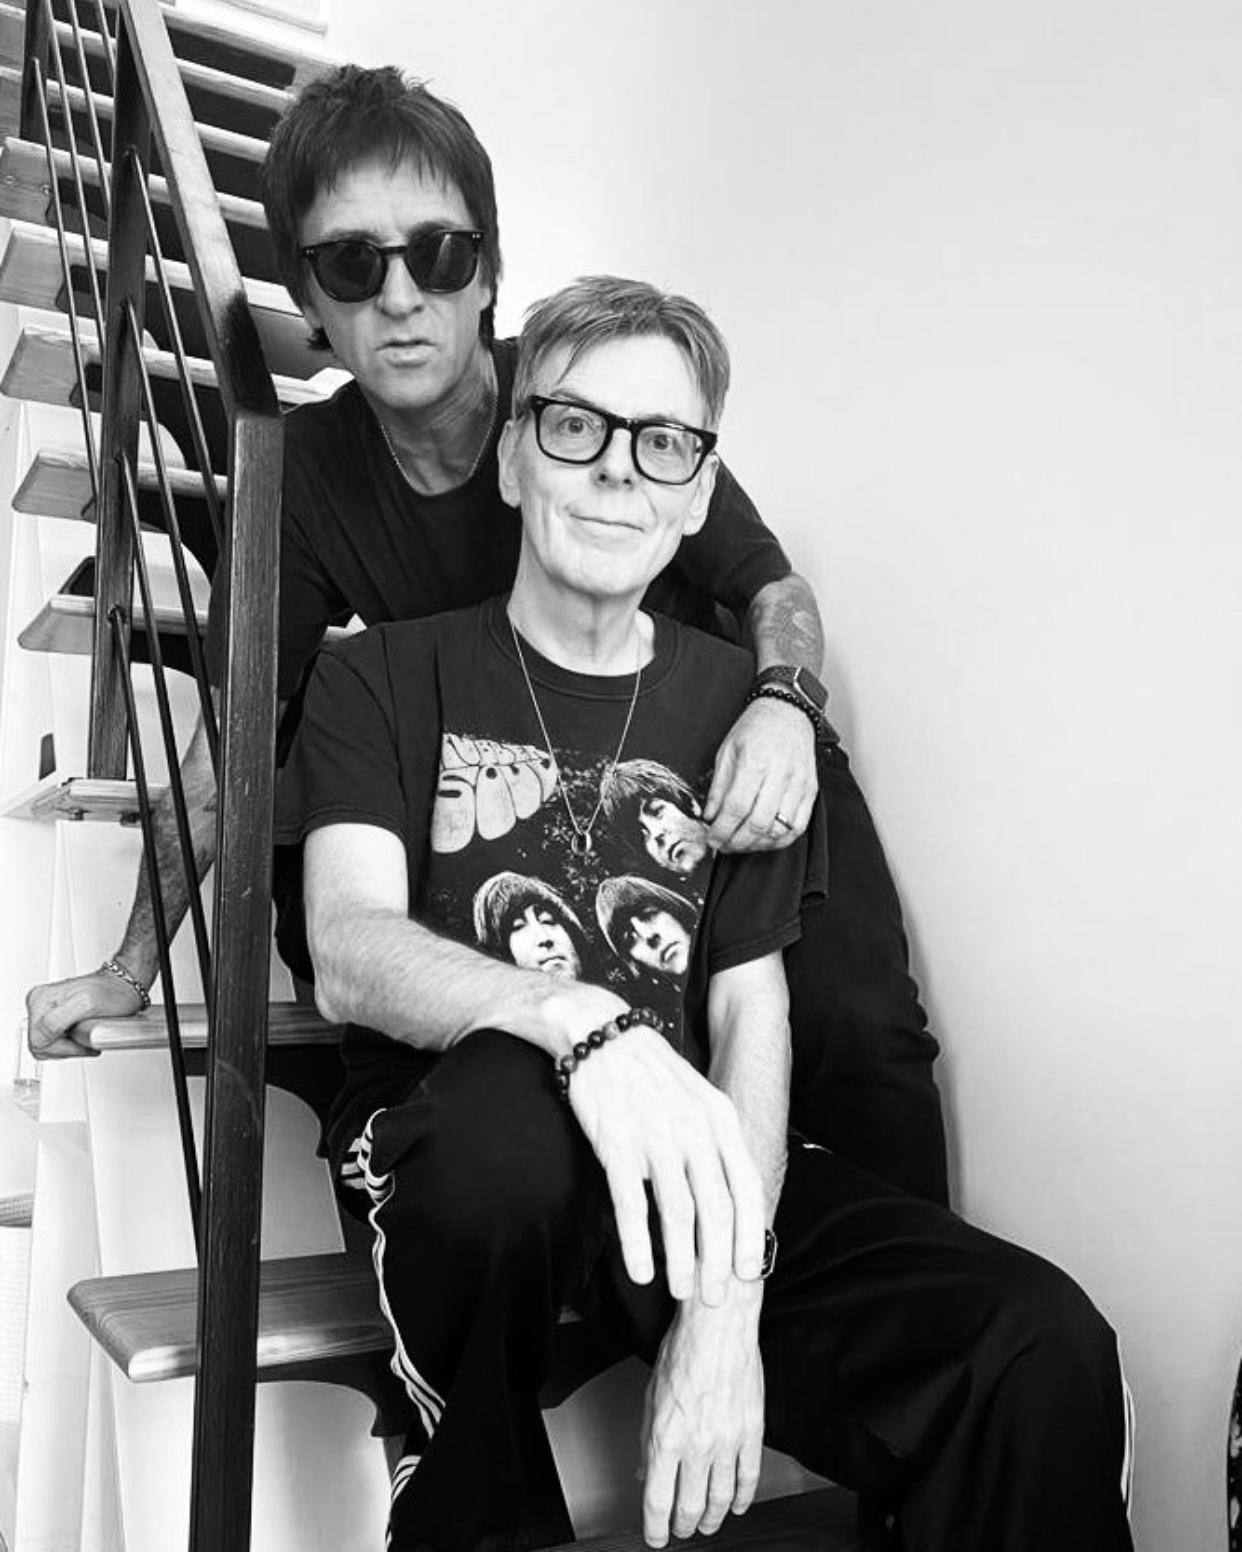 Black and white photo of Andy Rourke and Johnny Marr